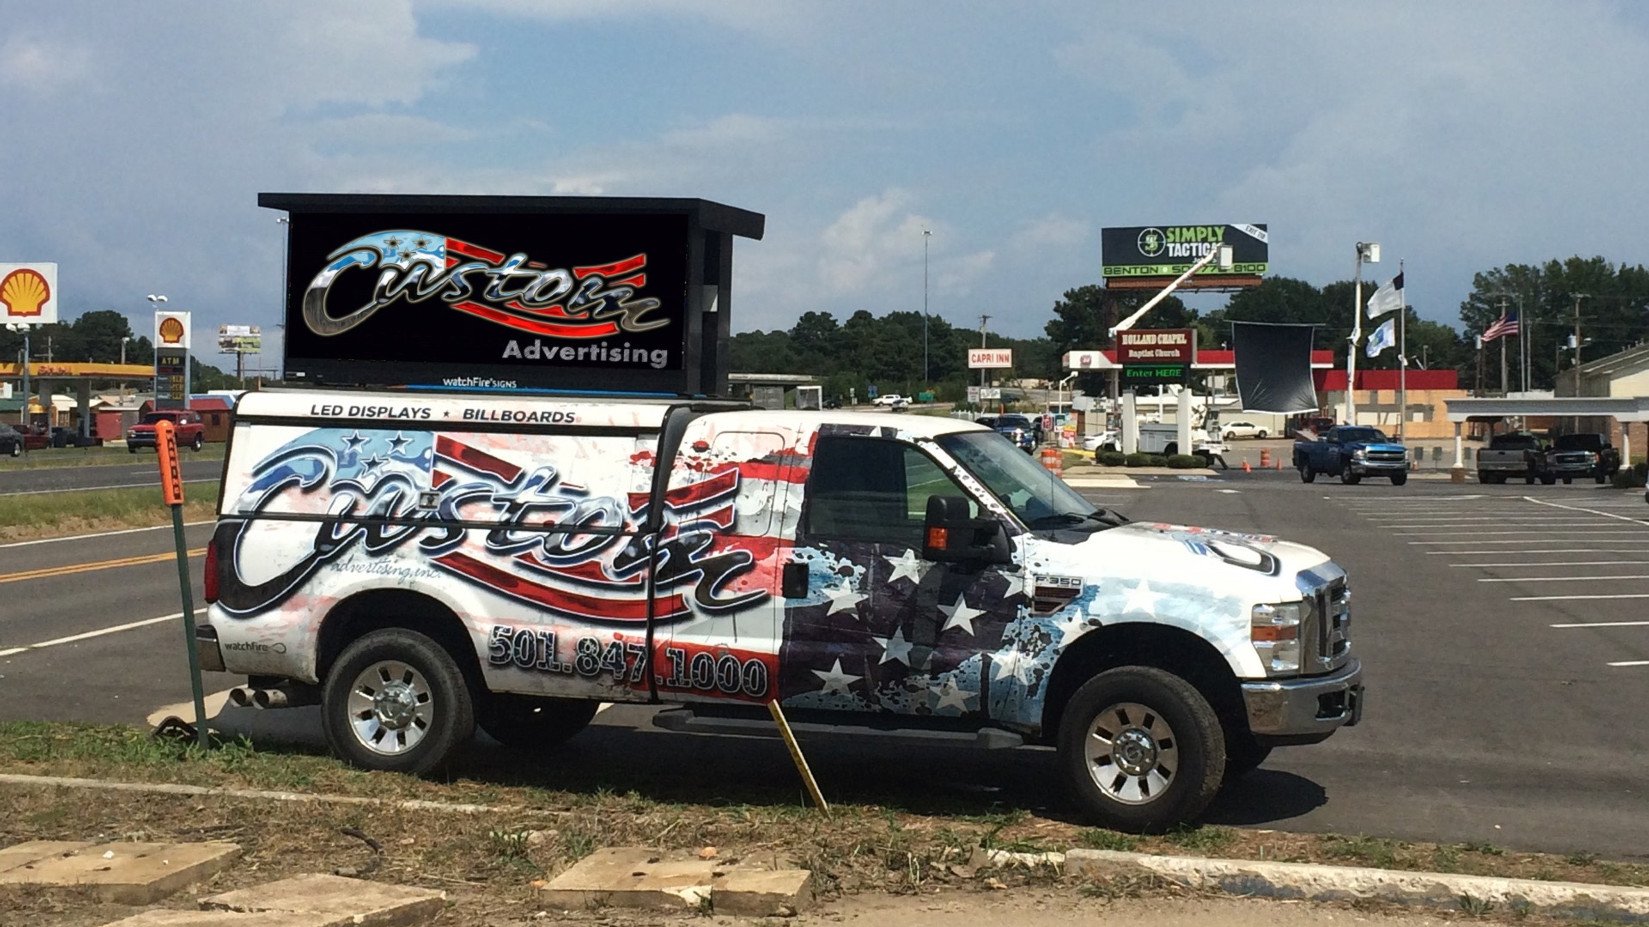 Call 501-847-1000 to reserve YOUR Custom Ad Space.